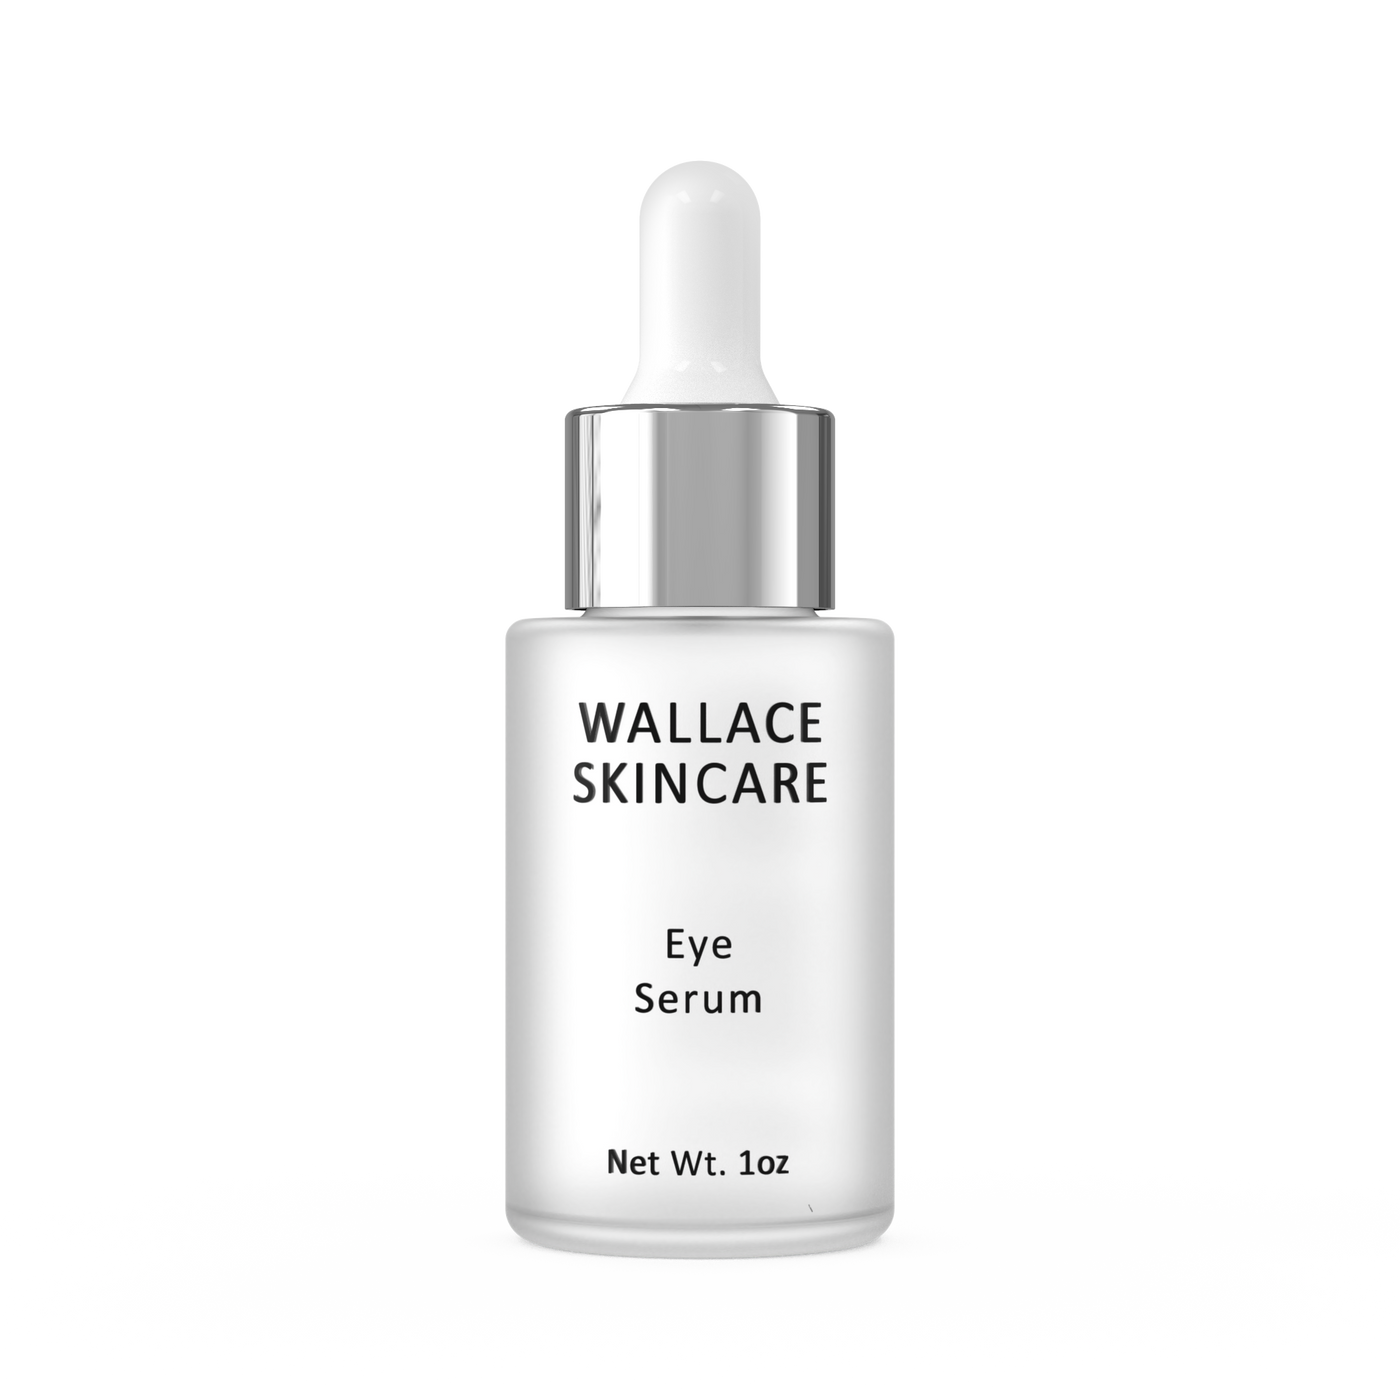 Anti-Aging 3 Serum Gift Set - Collagen, Face and Under Eye Serums by Wallace Skincare